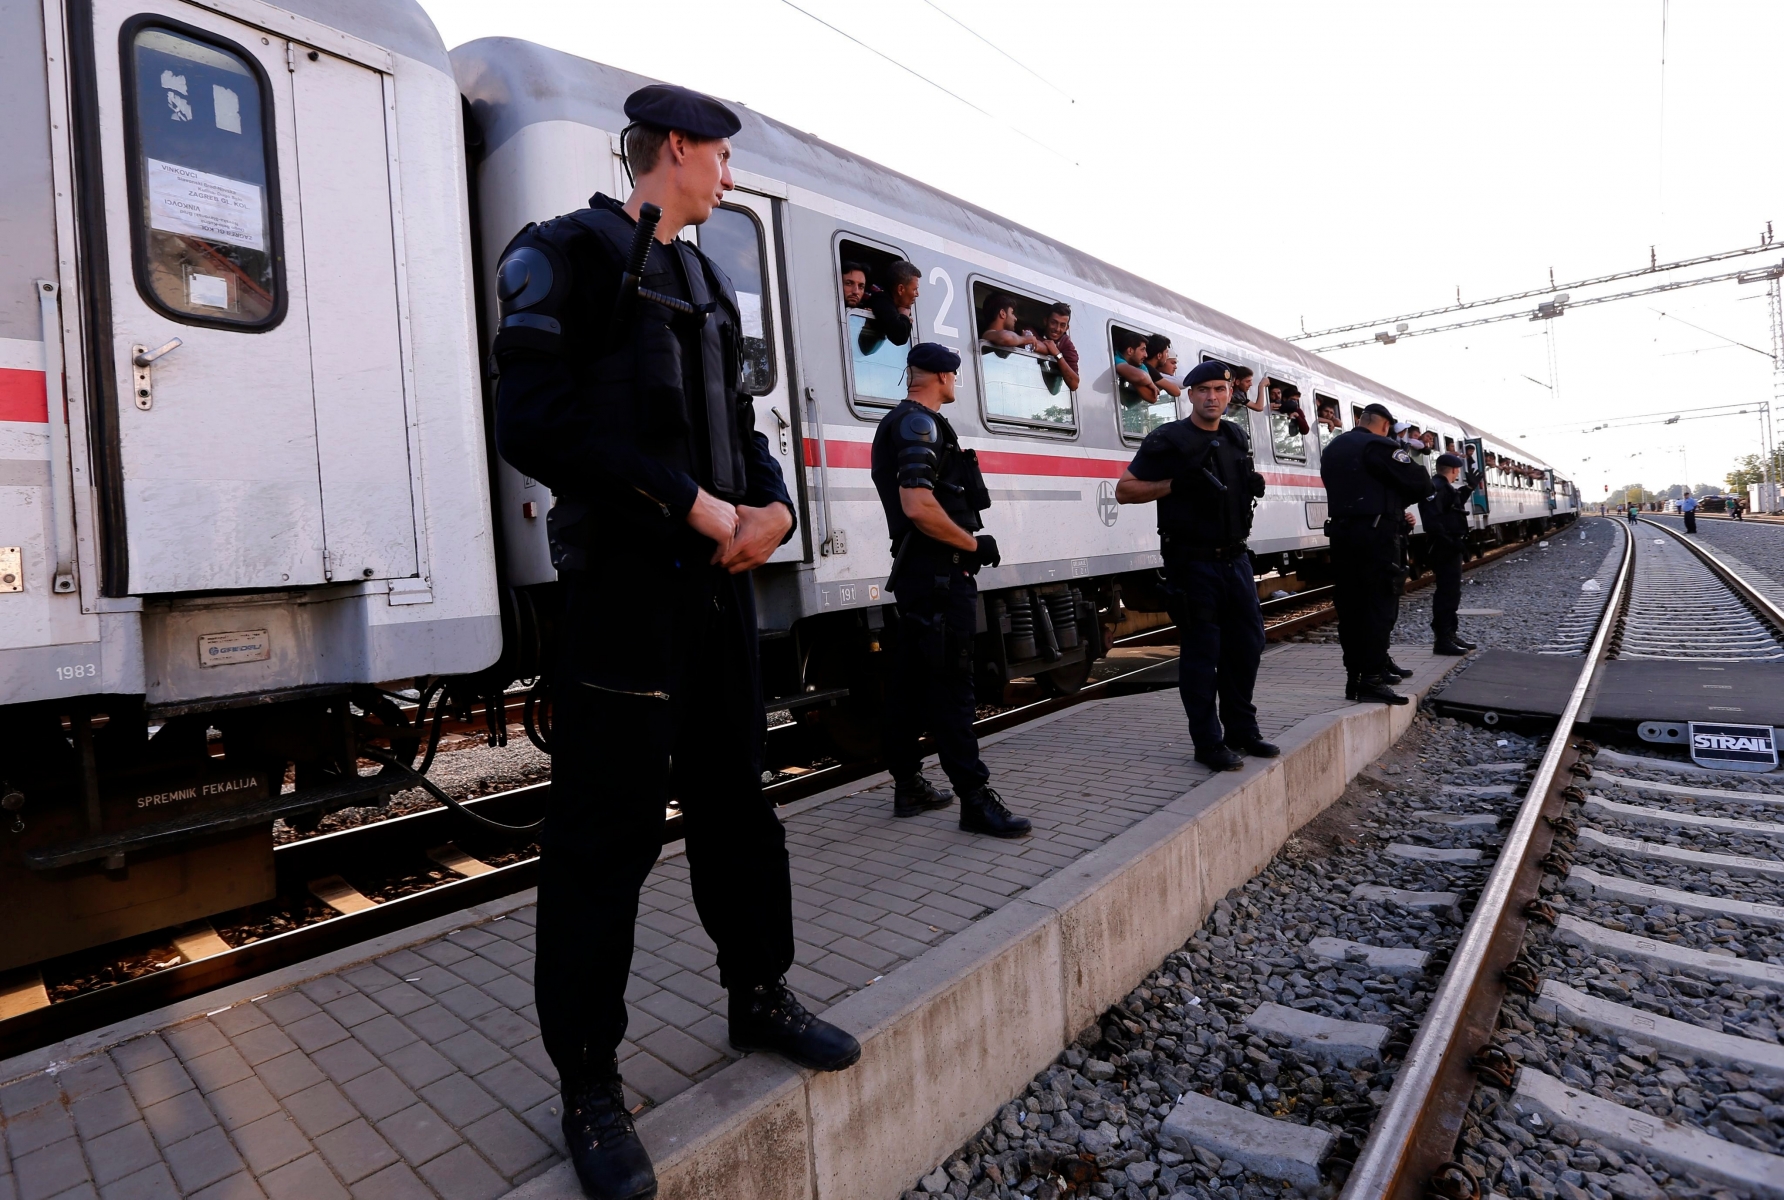 epa04945056 Police guard a train for Hungary at Tovarnik border town, Croatia, 23 September 2015. More and more migrants are arriving in Croatia via alternative routes to reach the European Union. Serbia's border with Croatia has become the latest flashpoint in Europe's refugee crisis as migrants sought alternative routes to Western Europe after Hungary slammed its doors shut. Hungary on 15 September sealed the last gap in the barricade along its border with Serbia, closing the passage to thousands of refugees and migrants still waiting on the other side and some groups decided to pass over Croatia.  EPA/ANTONIO BAT CROATIA REFUGEES MIGRATION CRISIS